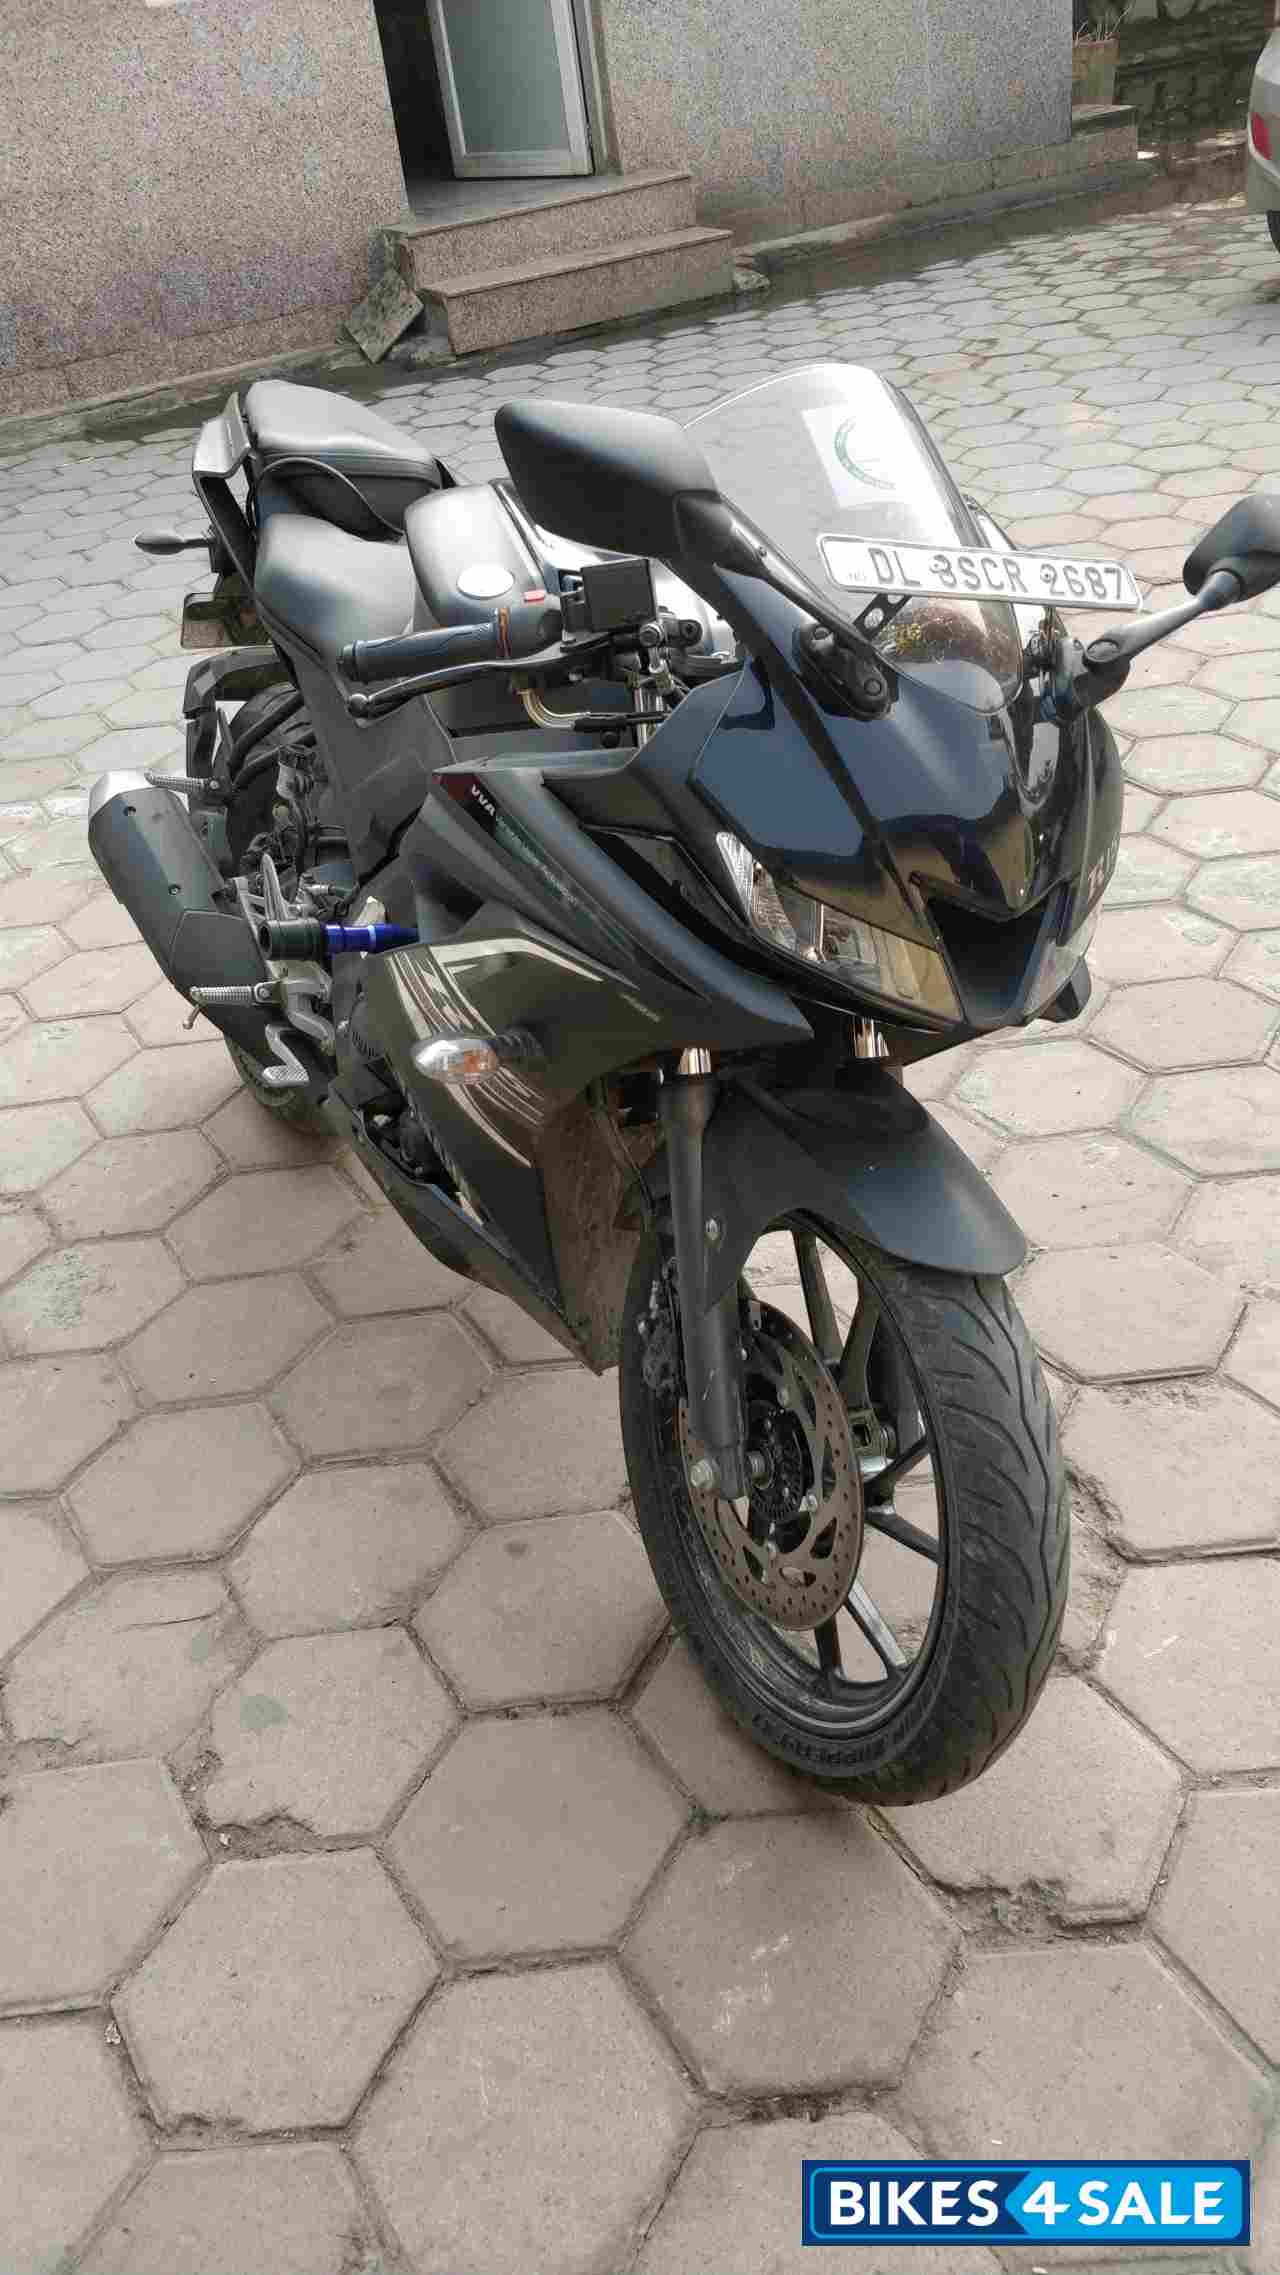 Used 2019 model Yamaha YZF R15 V3 for sale in New Delhi. ID 260541 ...